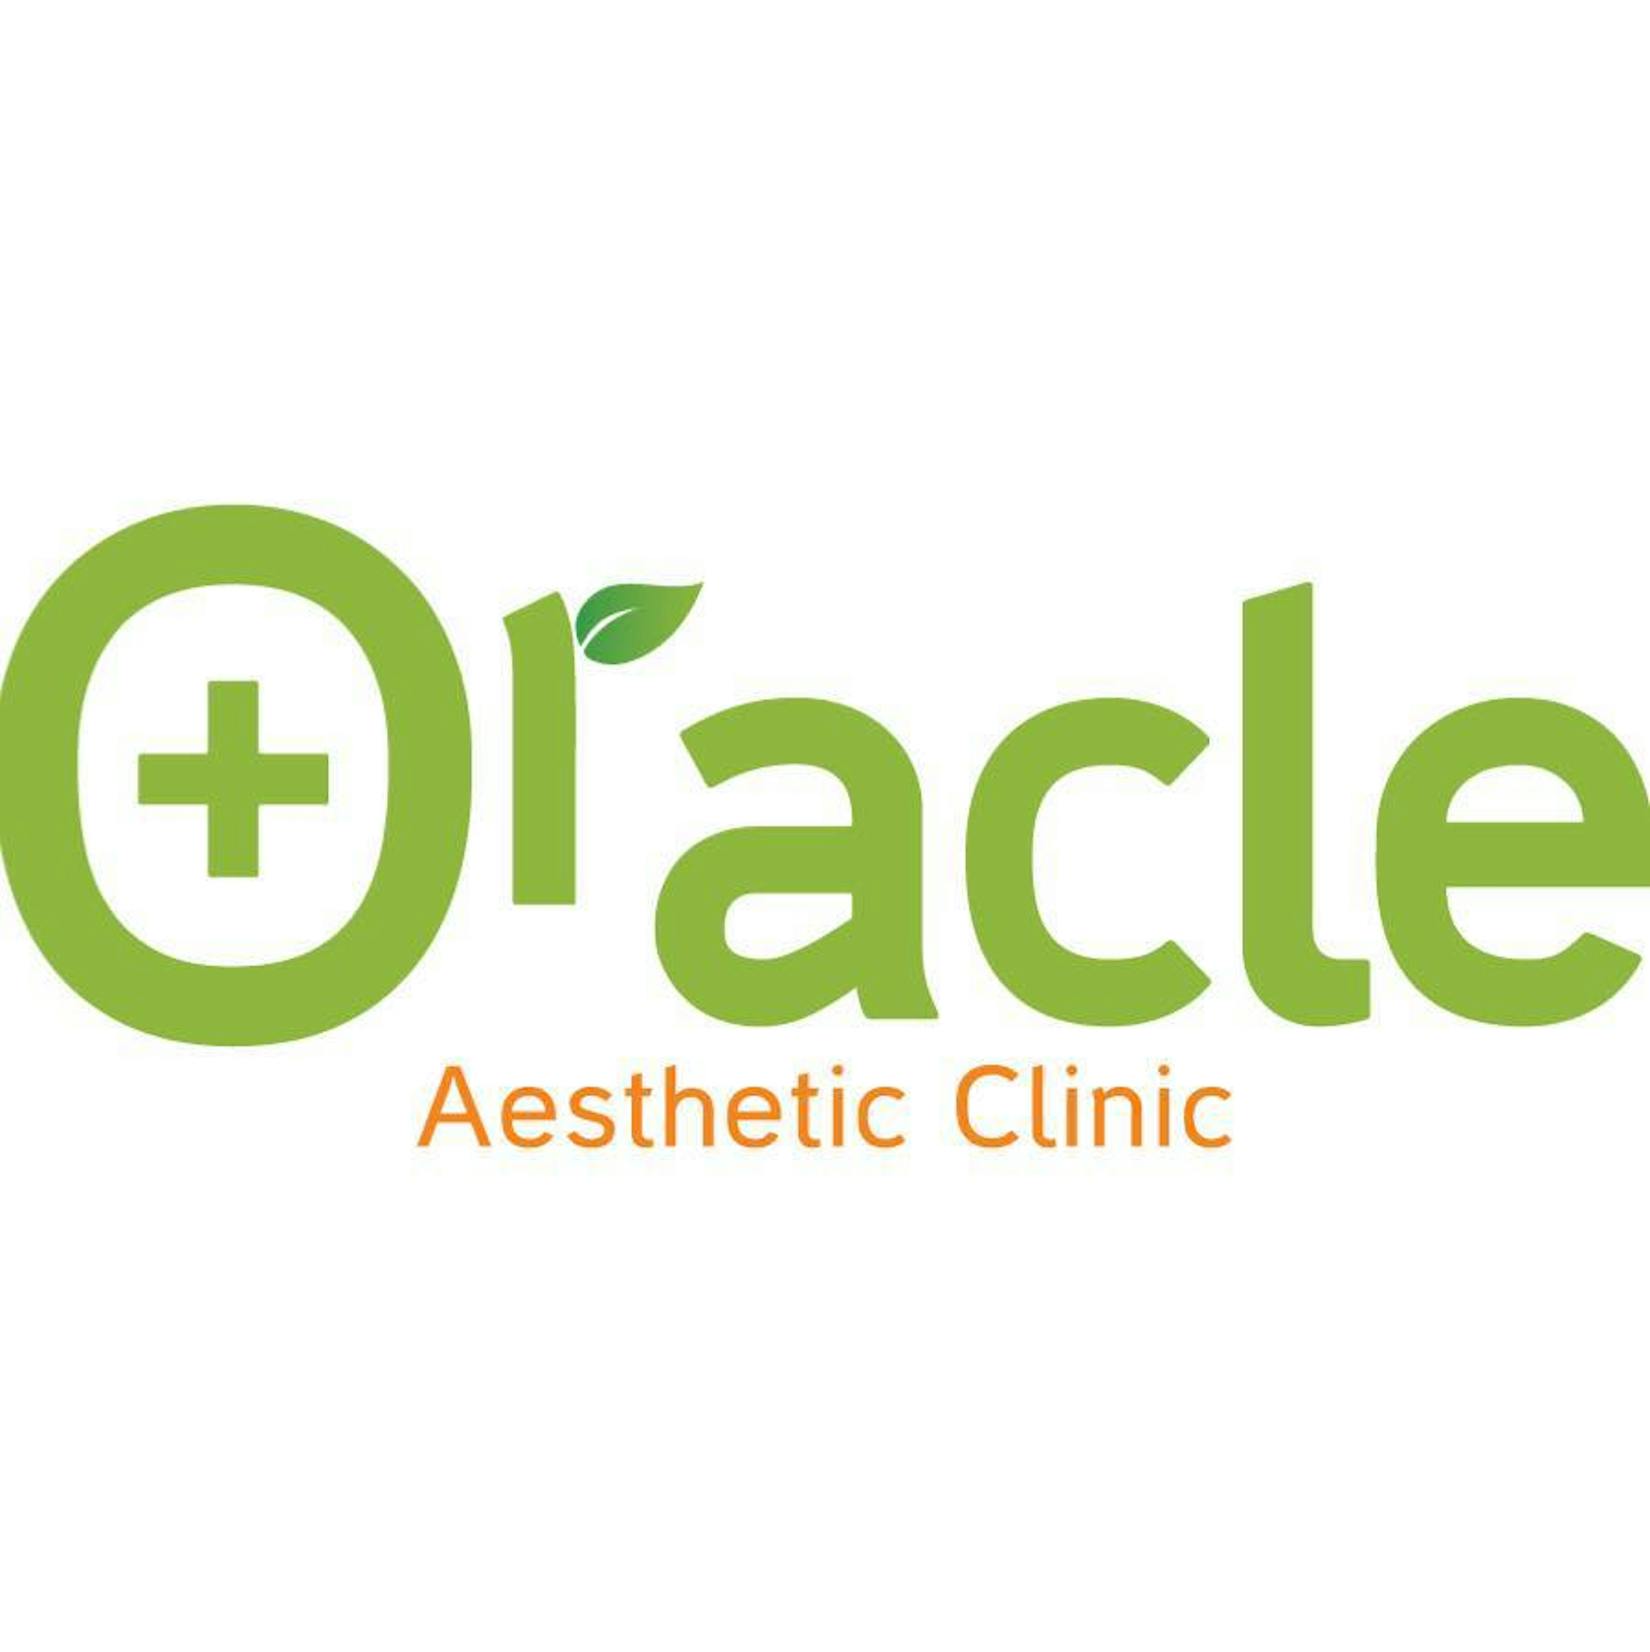 Oracle Clinic | Beauty